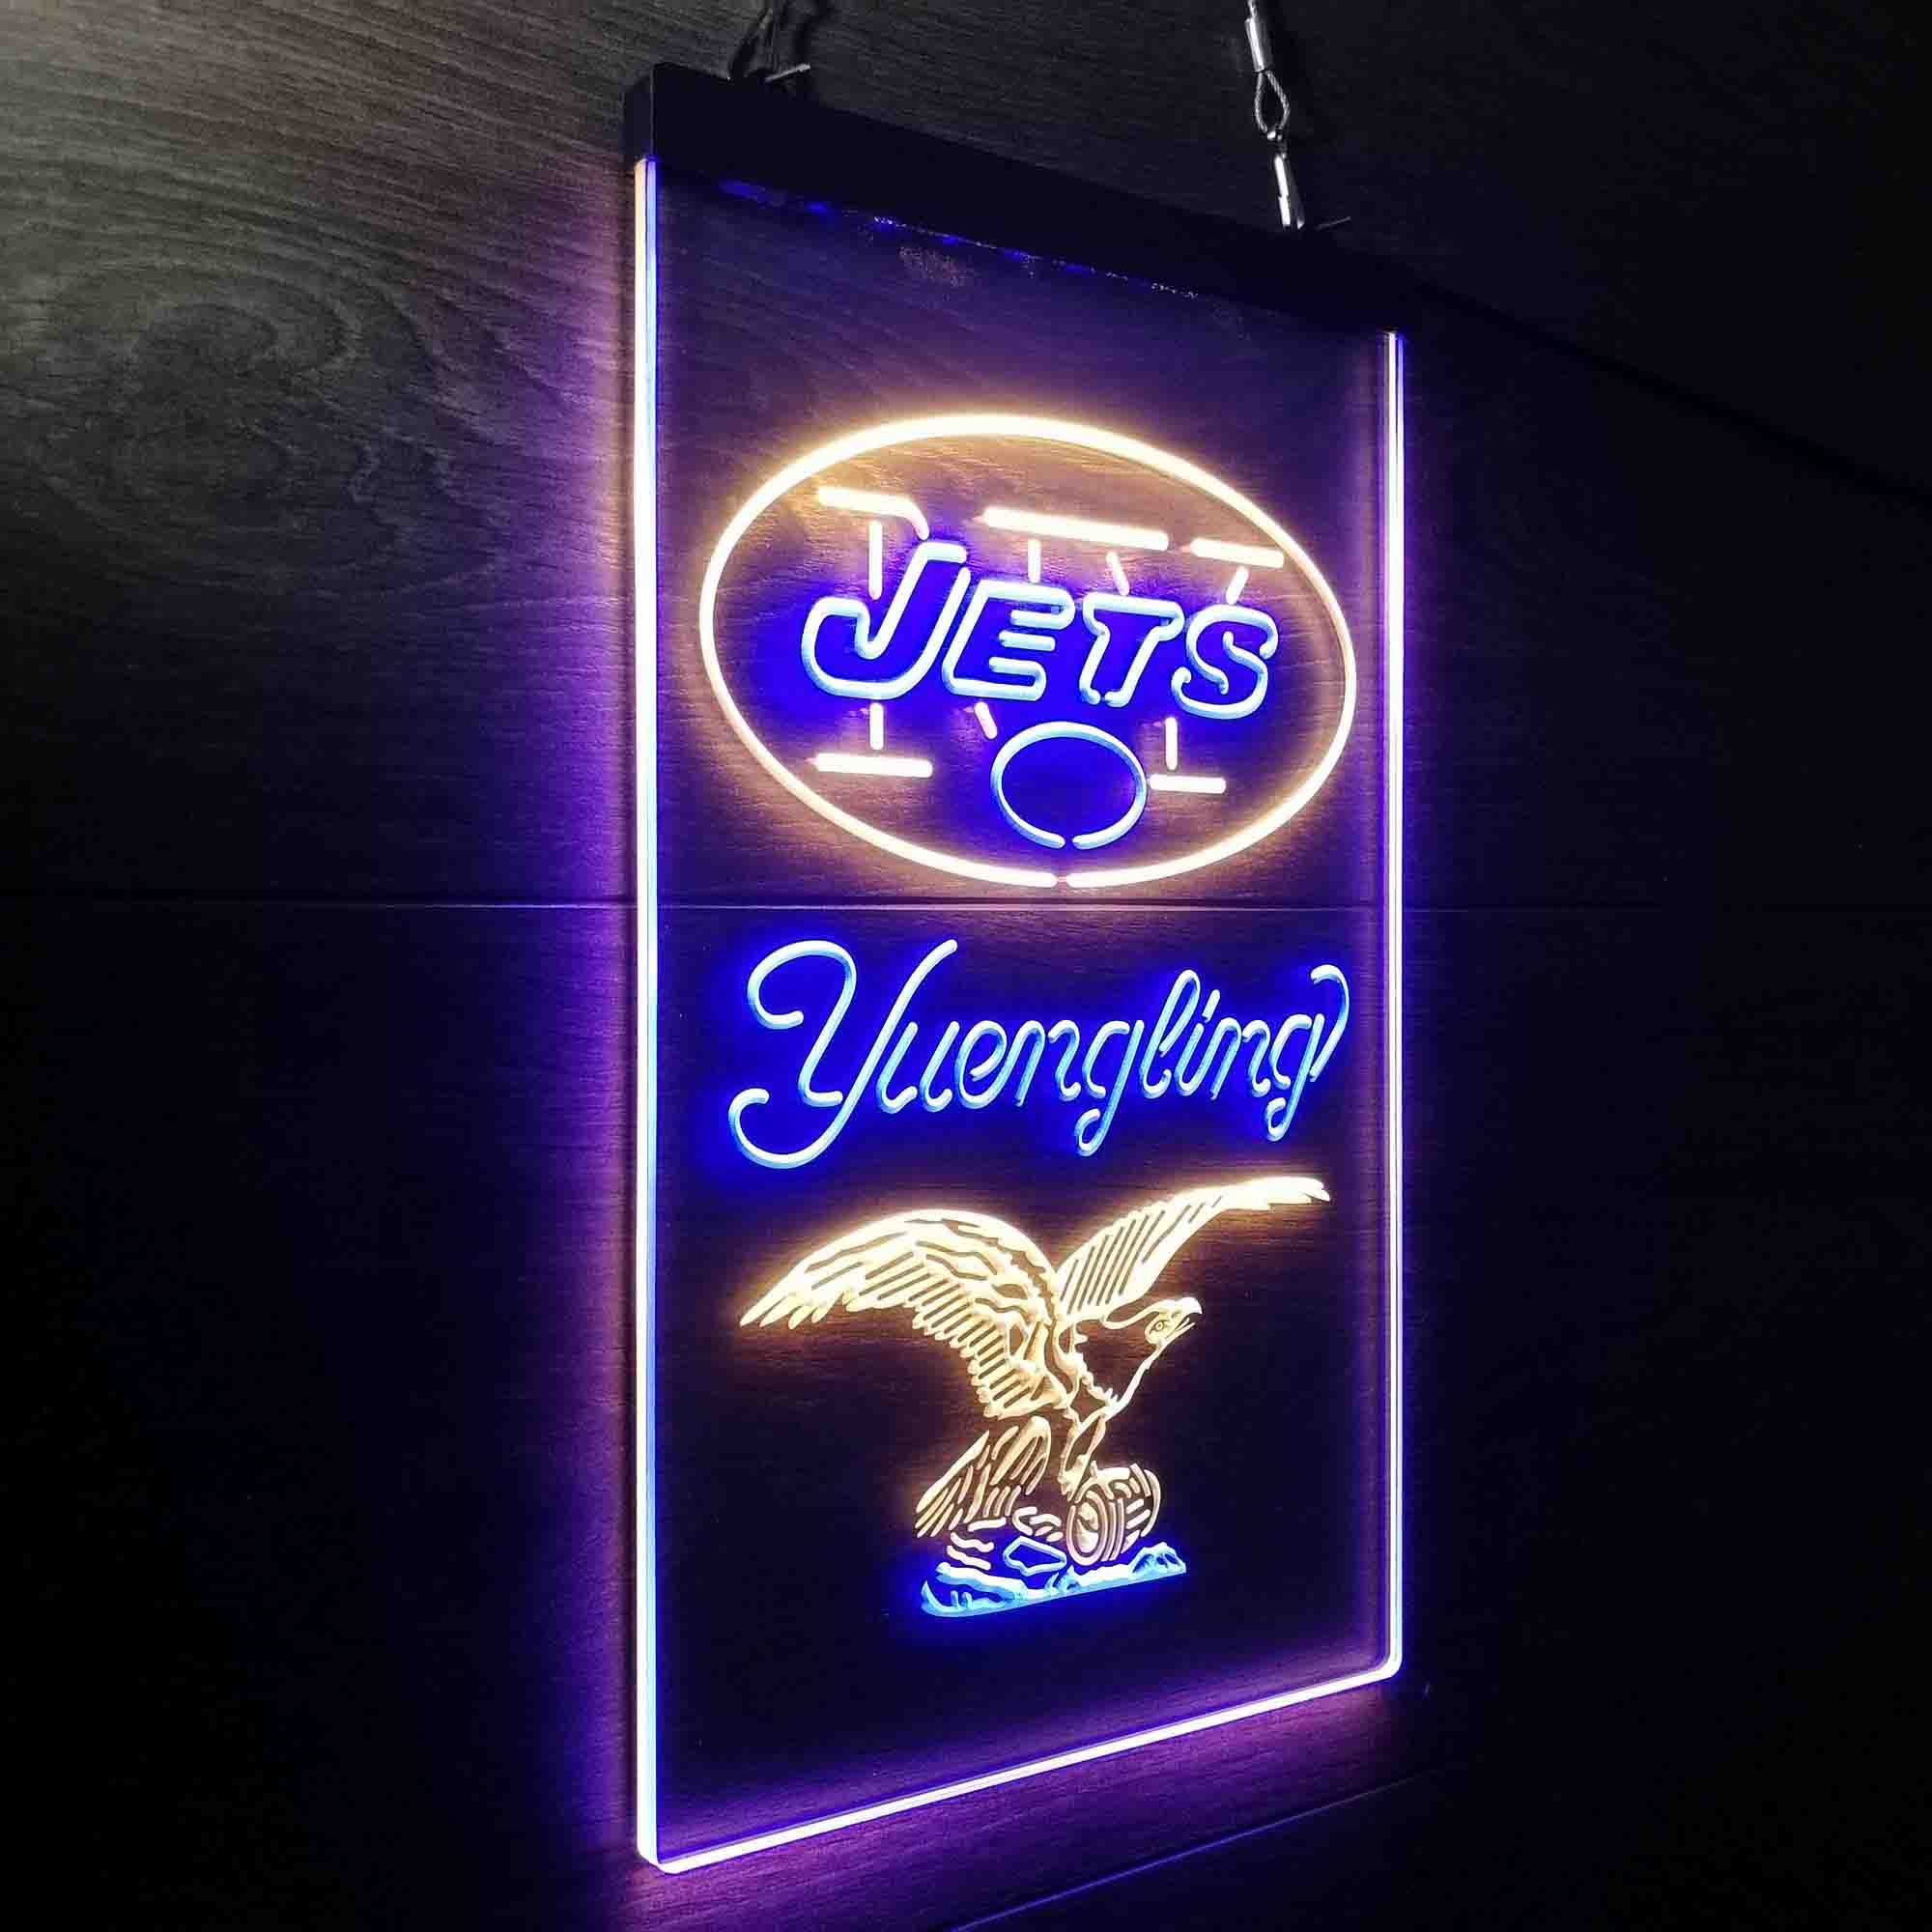 Yuengling Bar New York Jets Est. 1960 LED Neon Sign